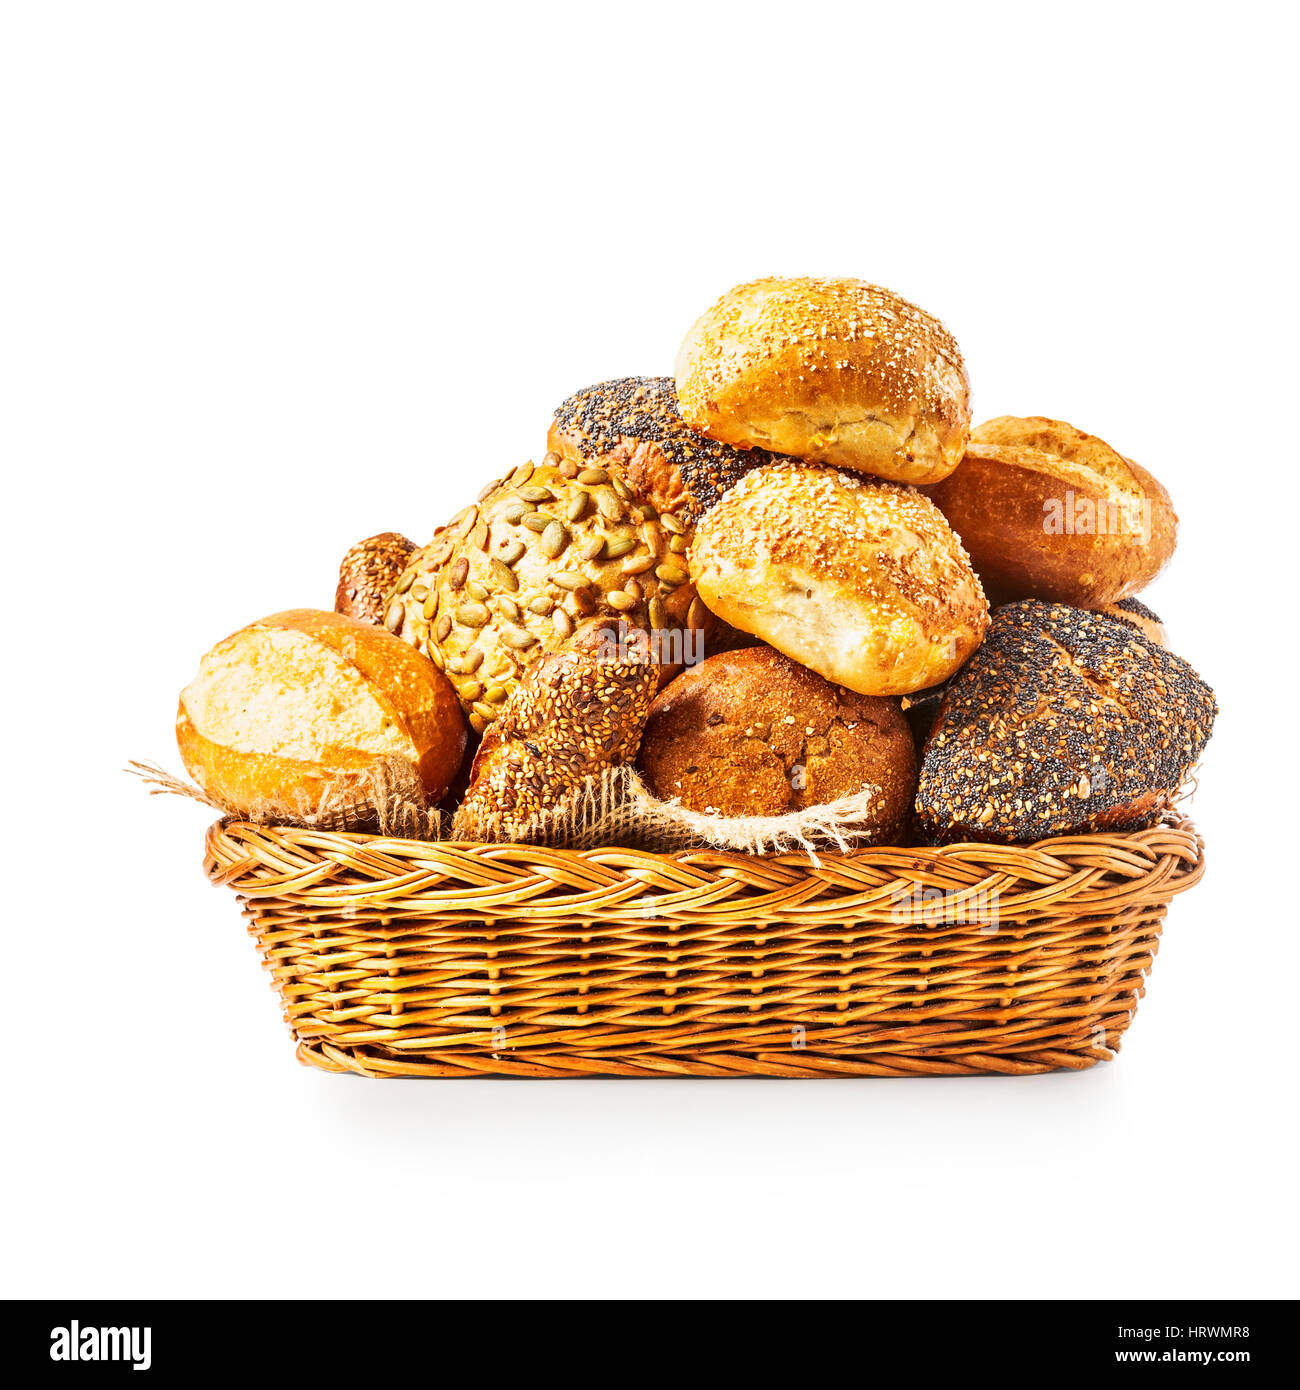 Basket of various bread rolls and buns isolated on white background clipping path included Stock Photo